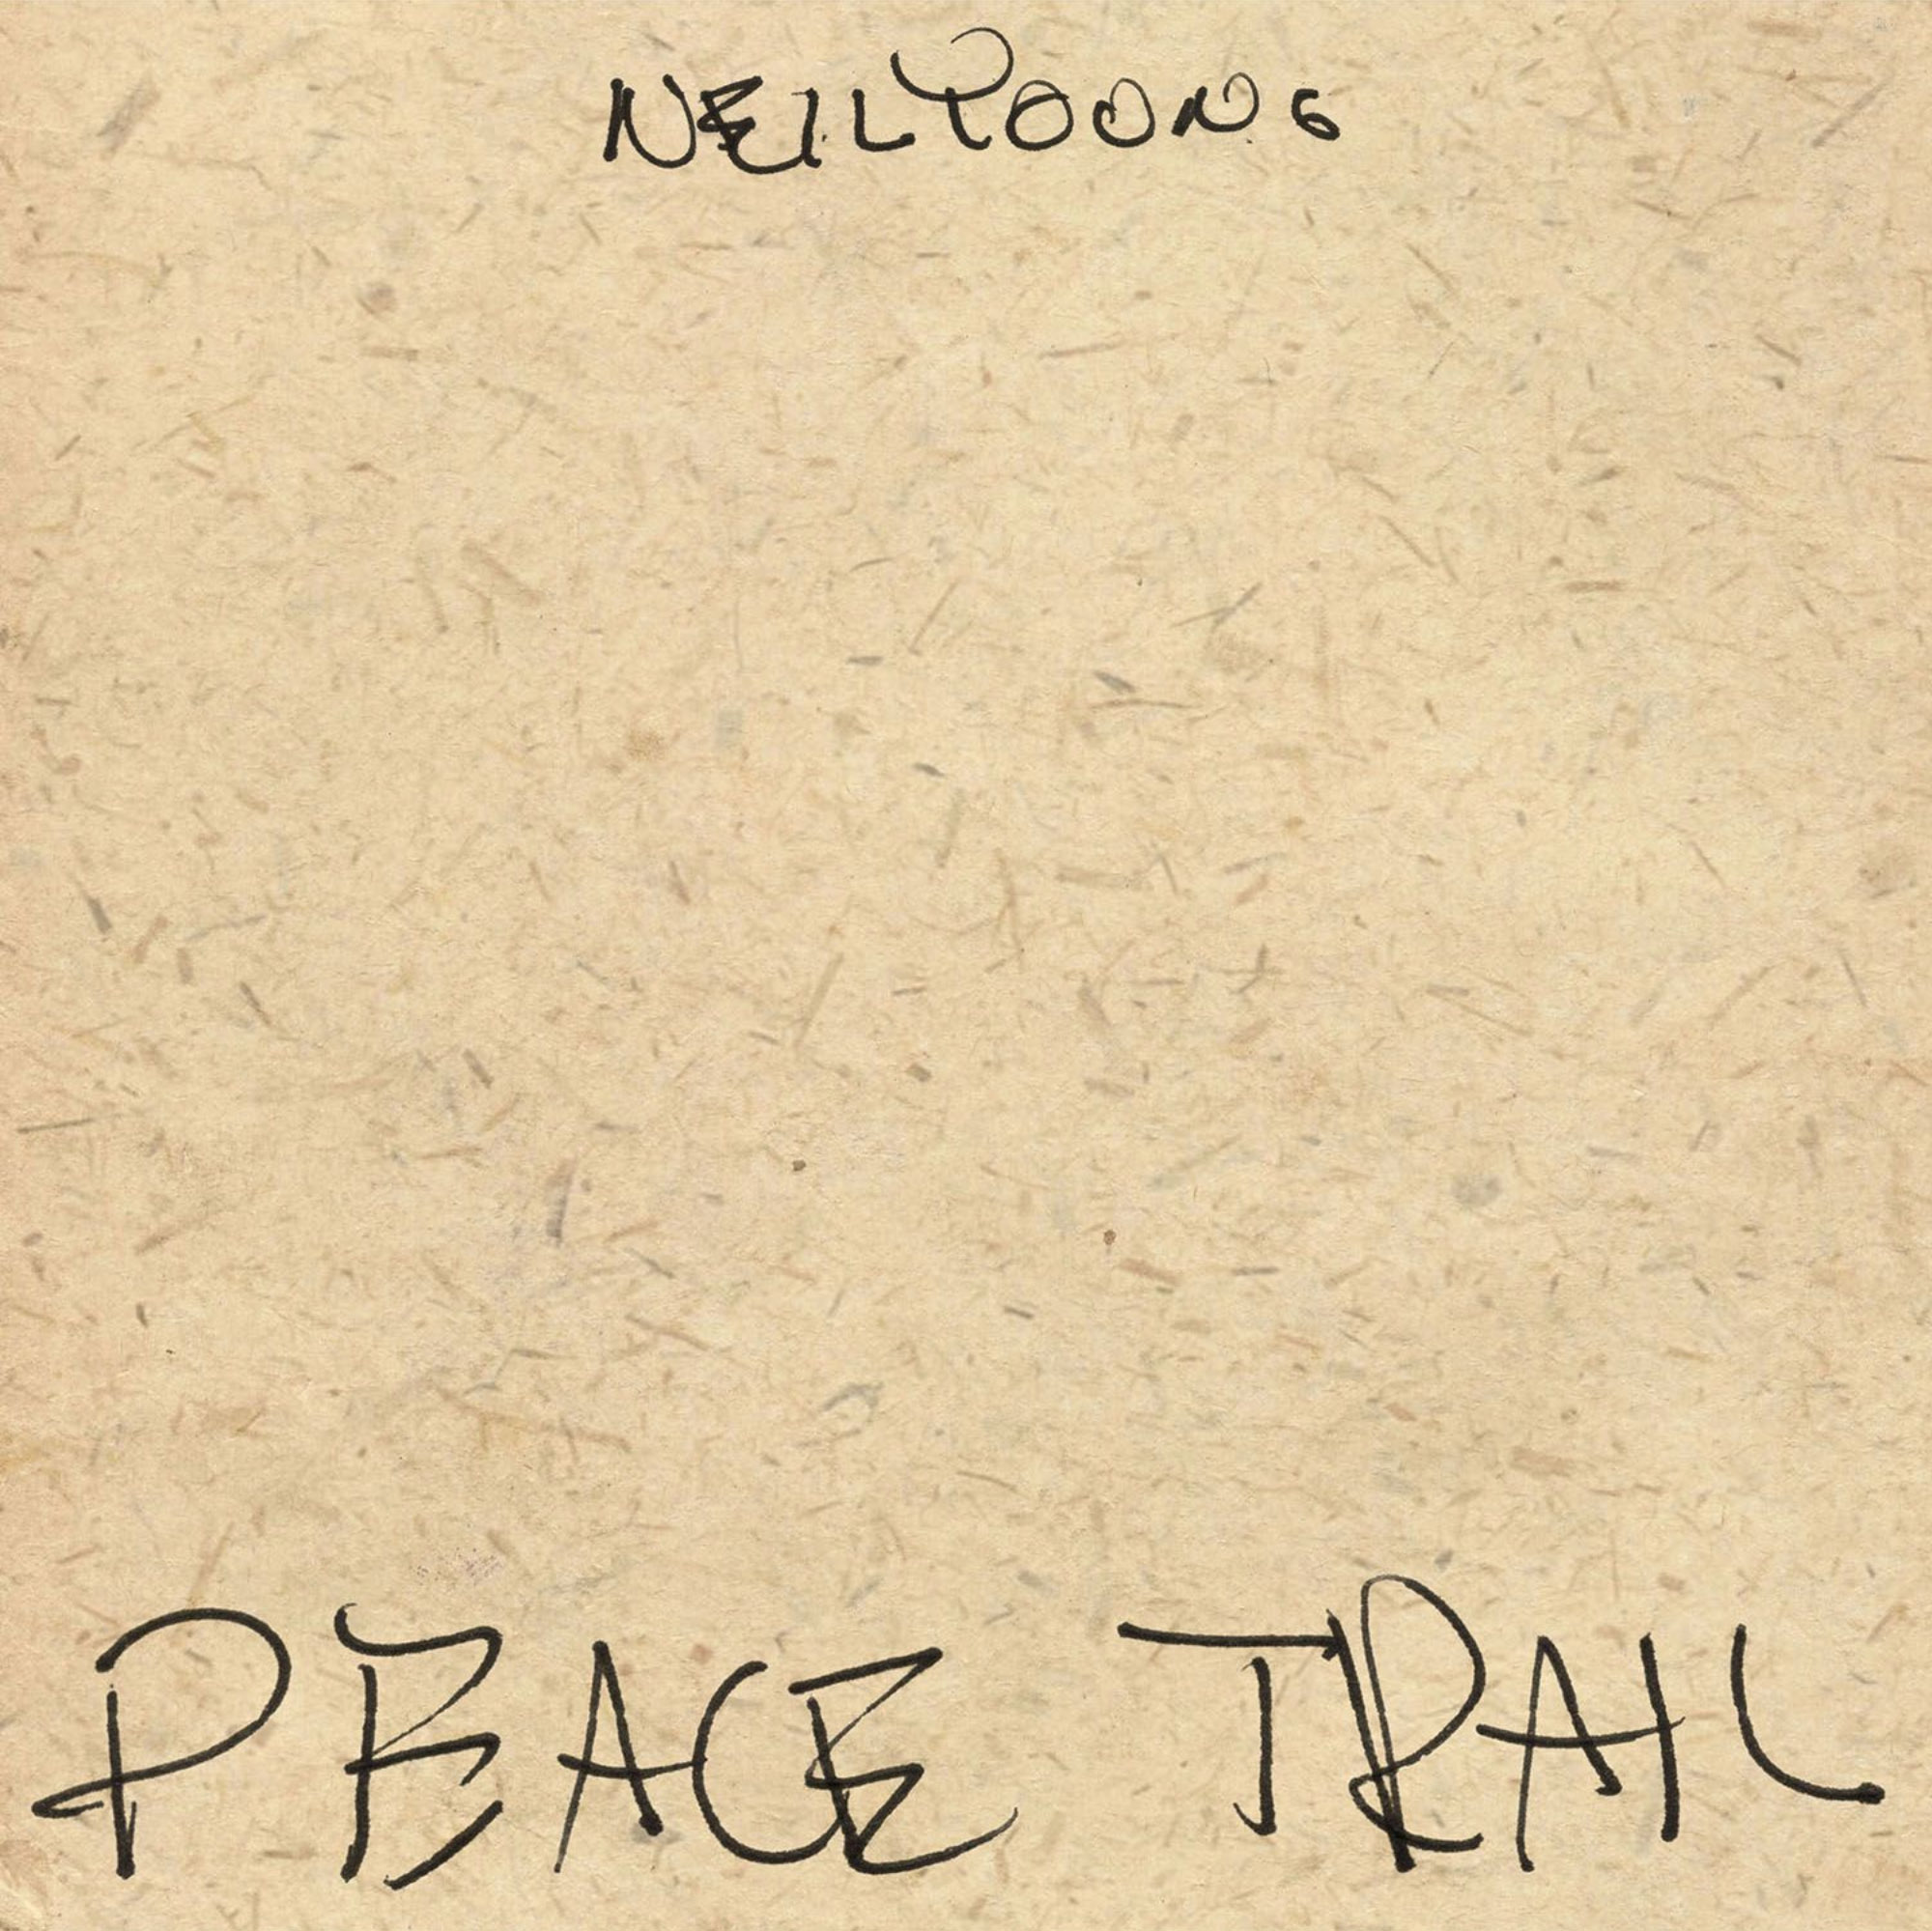 Neil Young - 2016 - Peace Trail [2016] 24-192